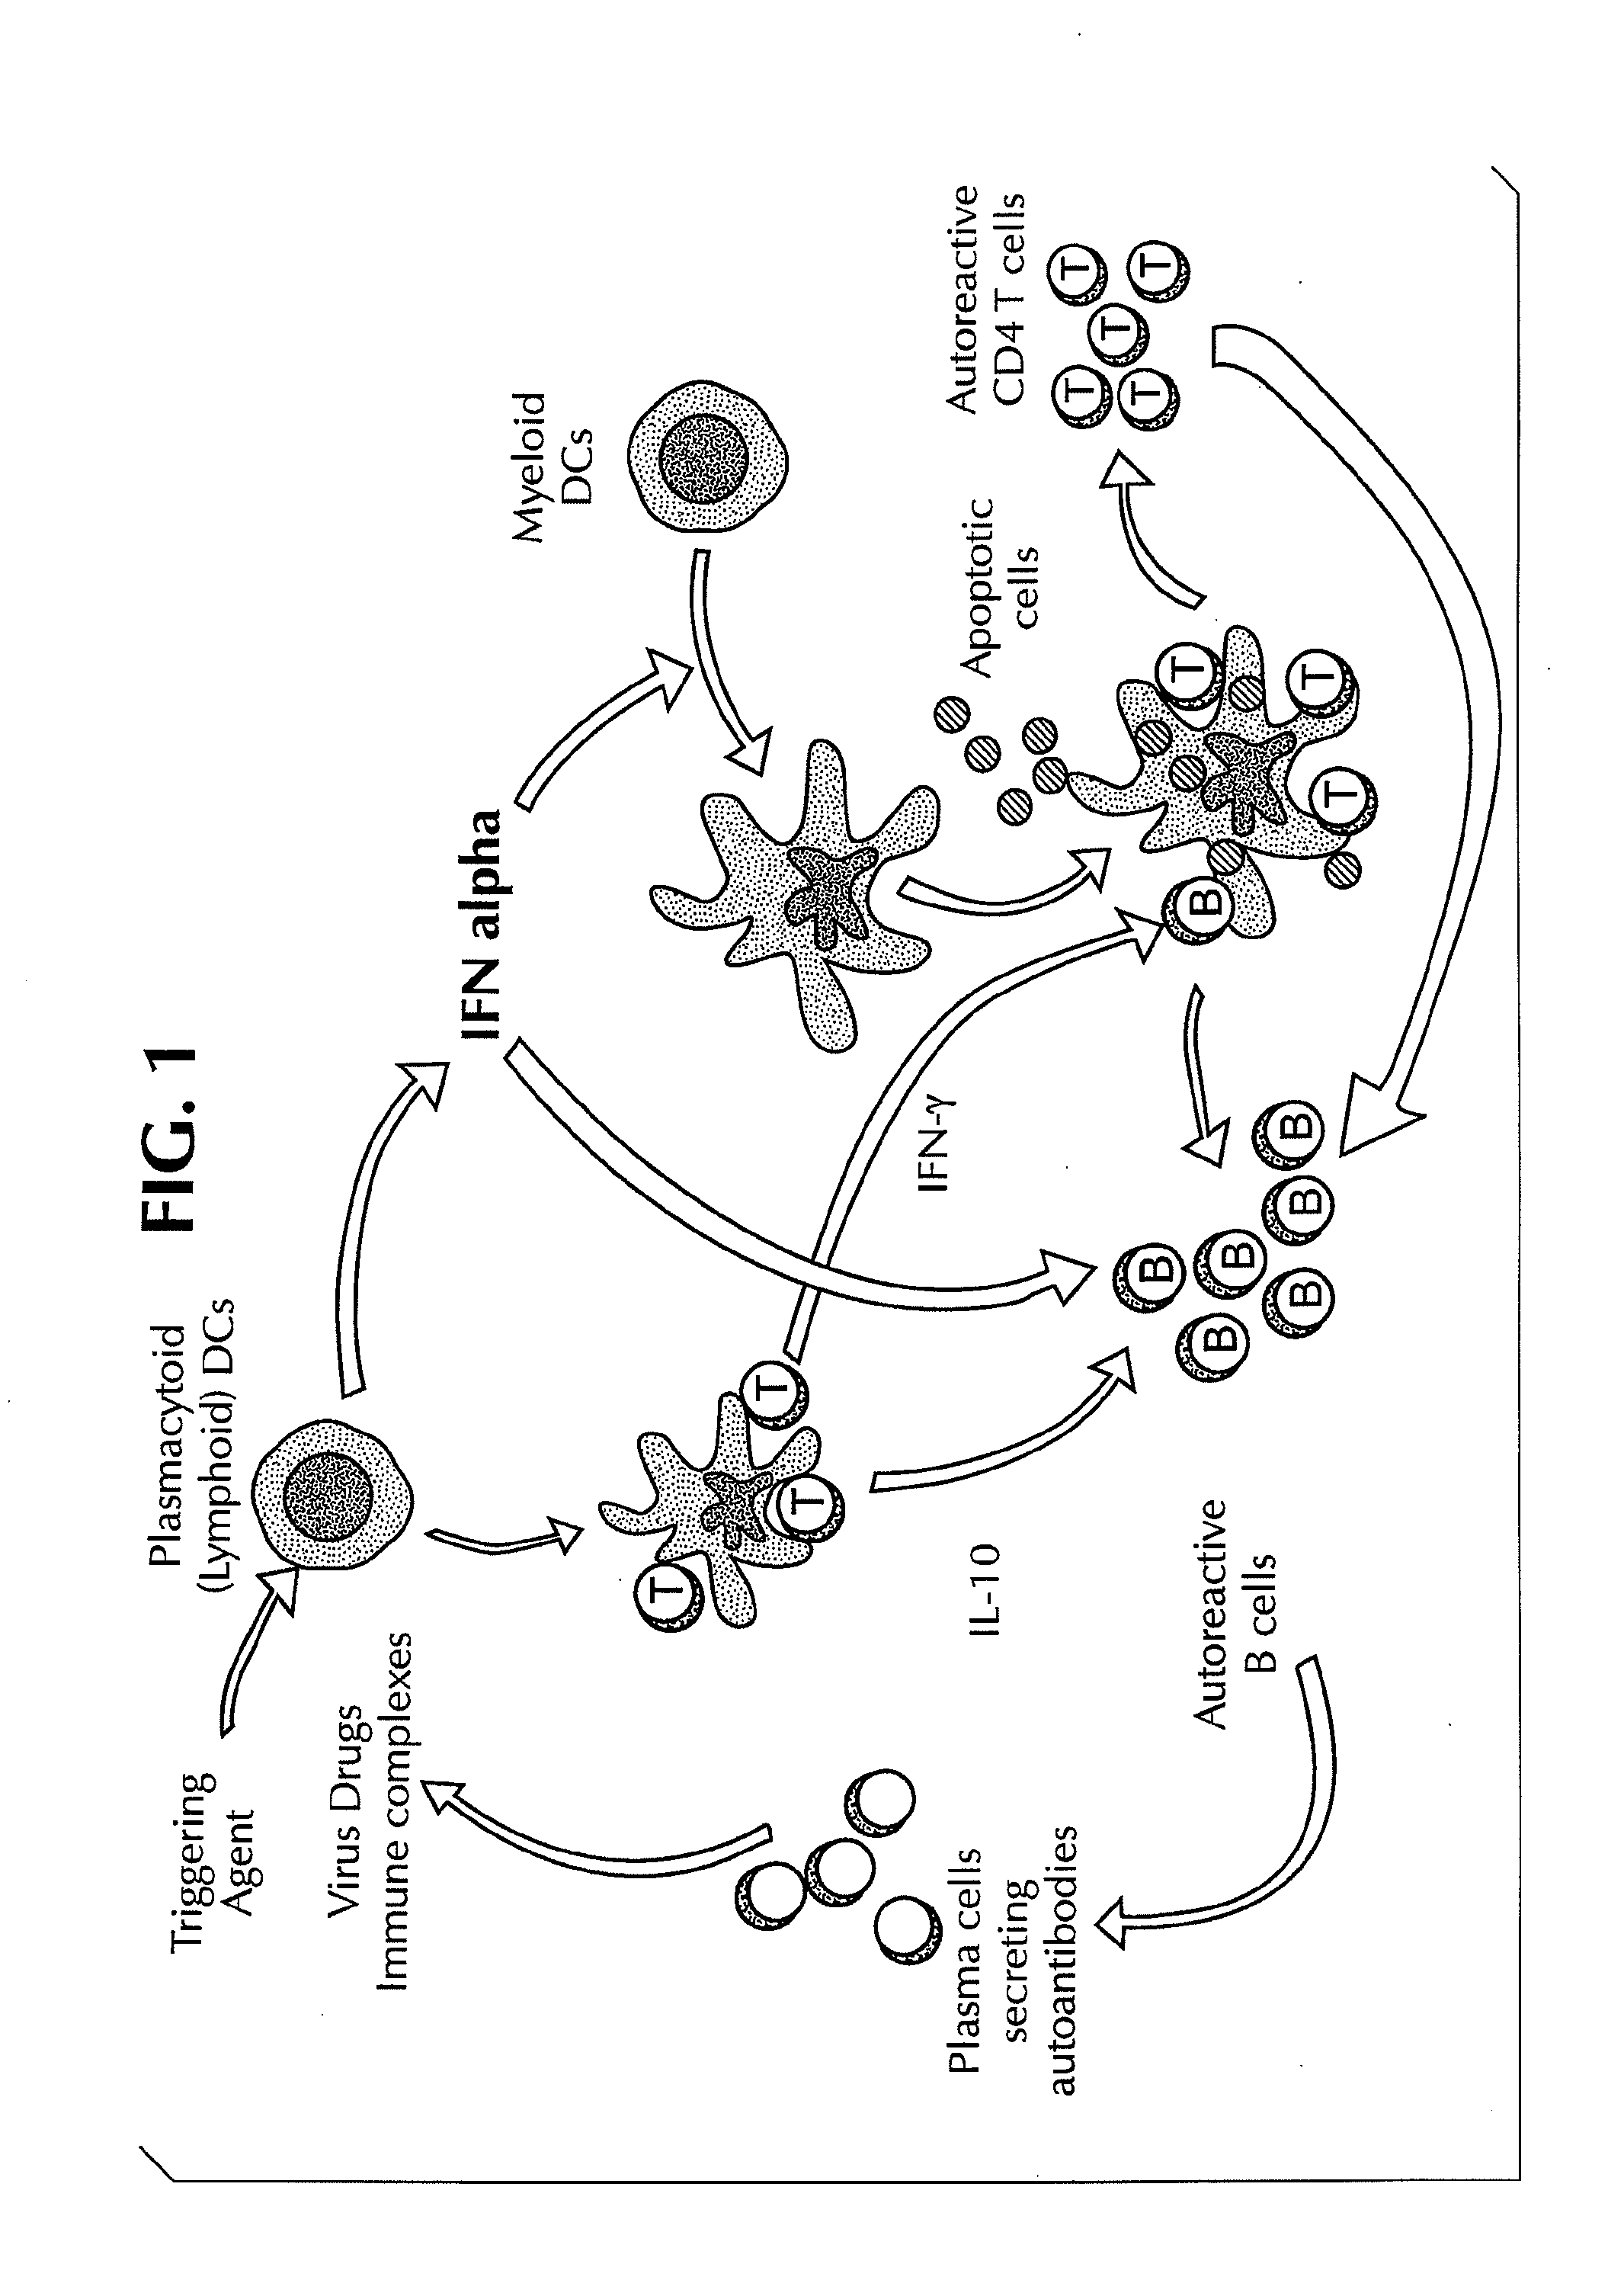 Methods for Treating Autoimmune Diseases in a Subject and In Vitro Diagnostic Assays